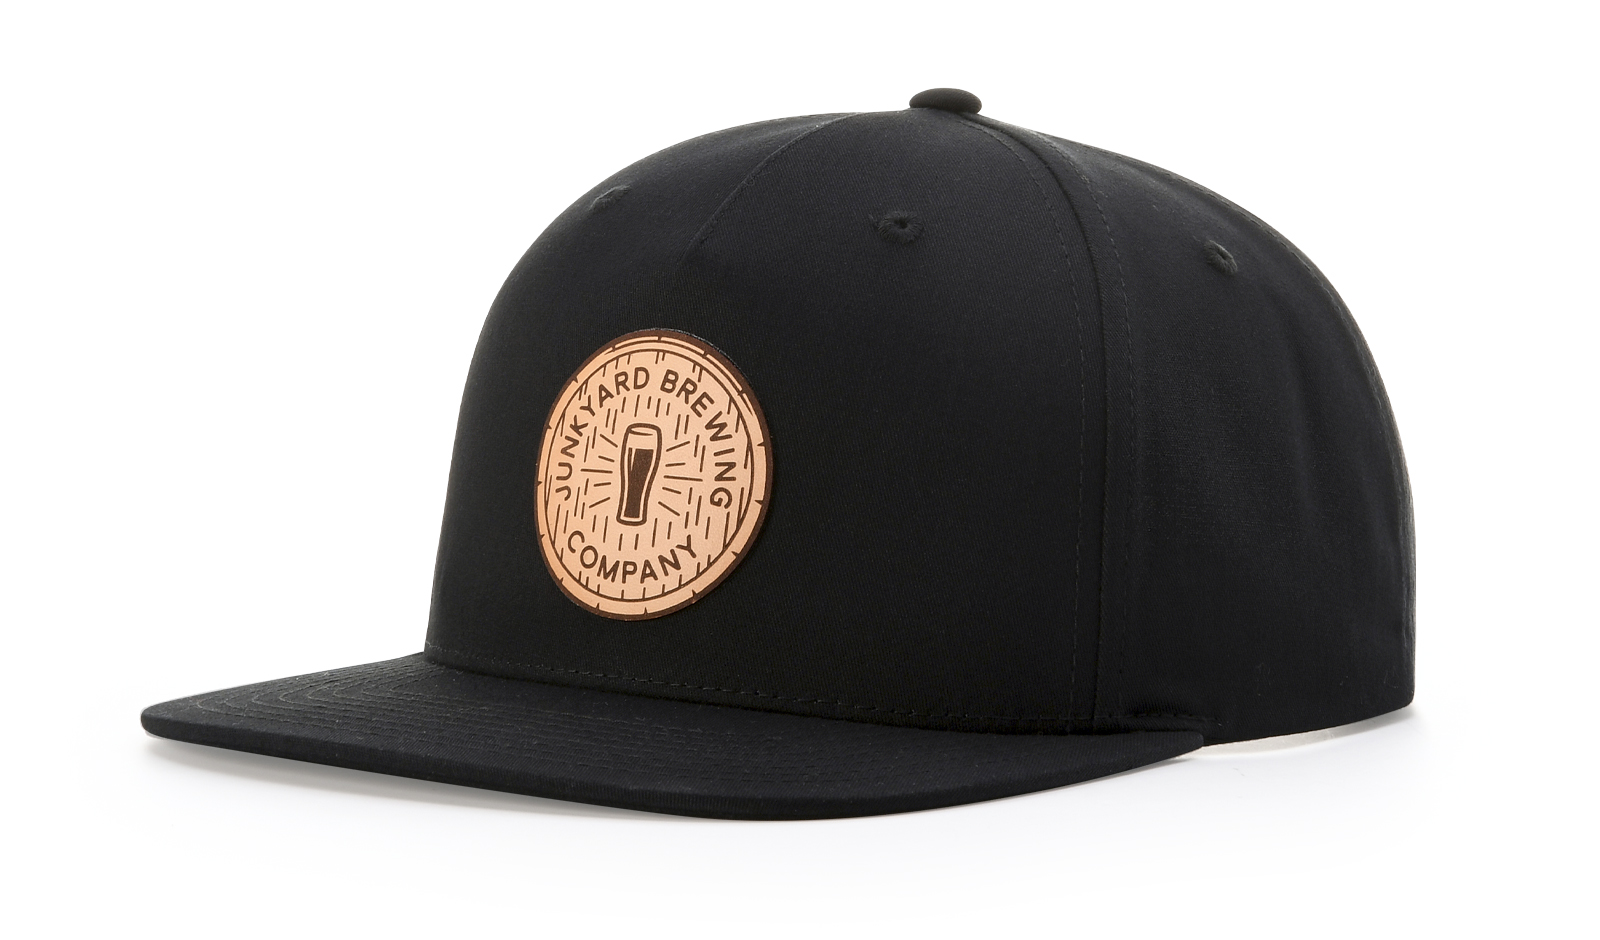 PINCH FRONT STRUCTURED SNAPBACK